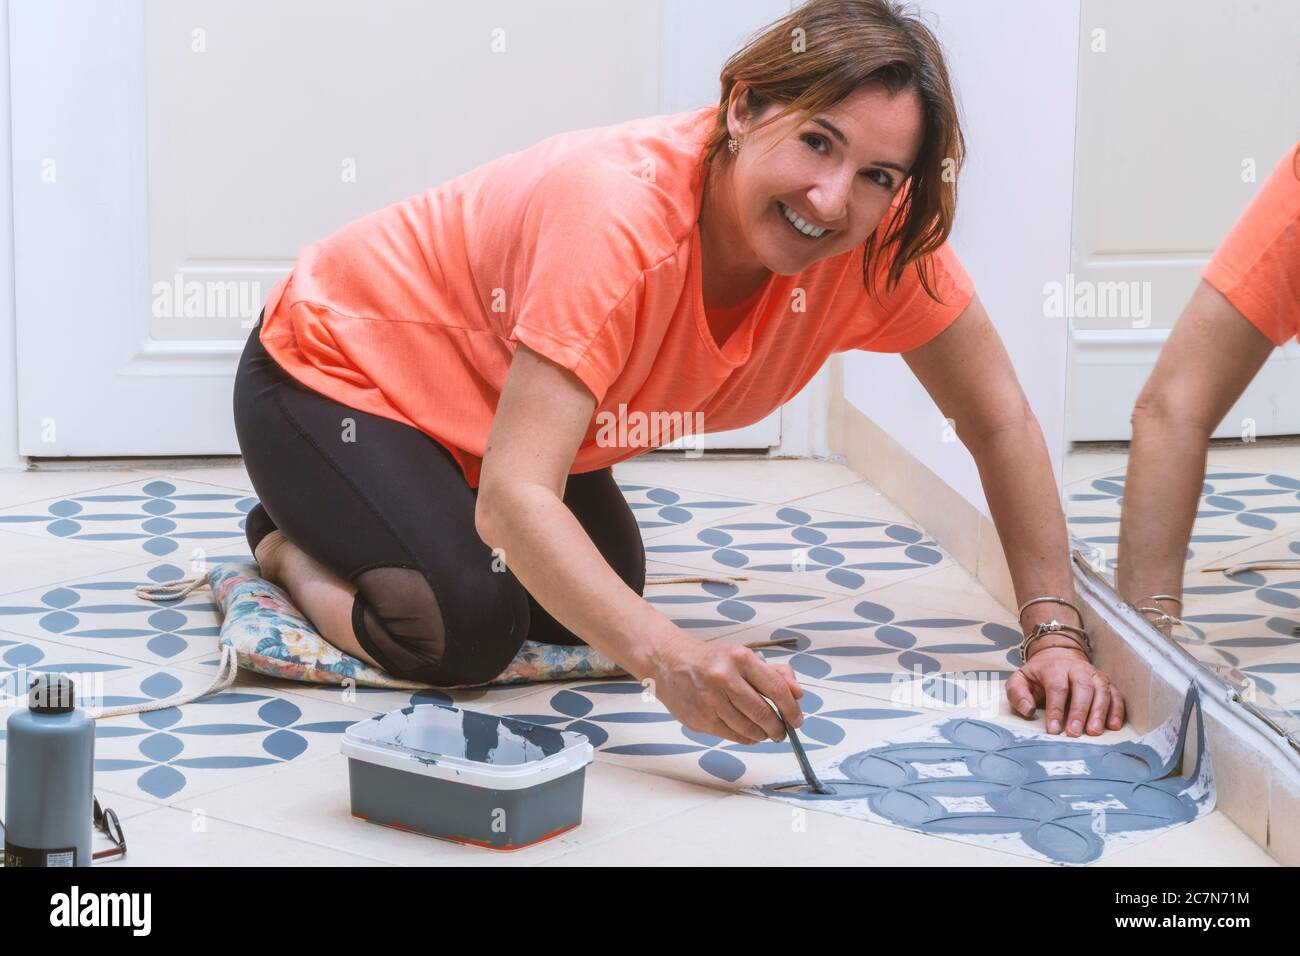 Stay at home and home improvement concept: Young caucasian woman with orange T- shirt is painting tiles of her home. Stock Photo